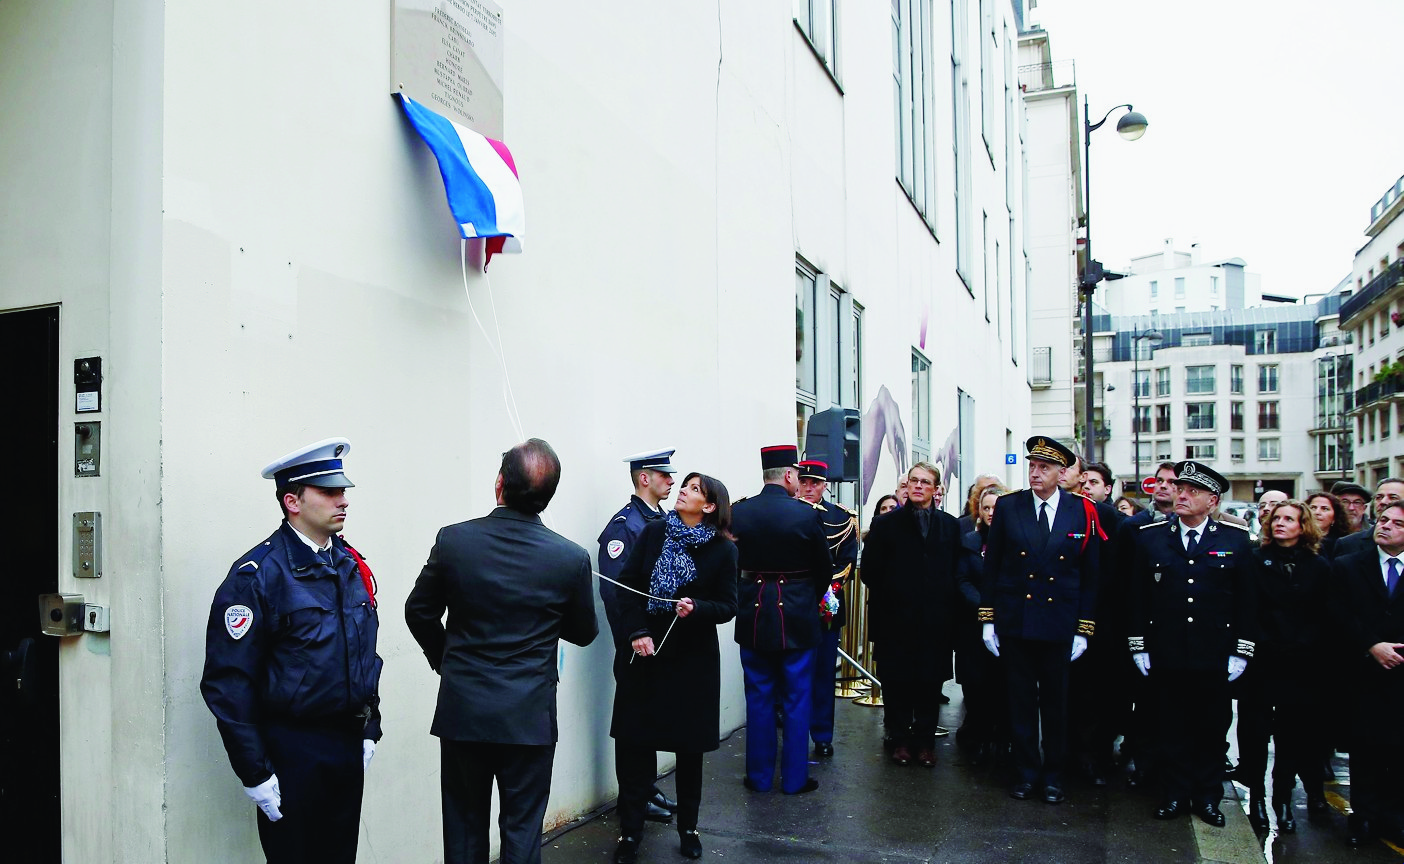 epa05088237 French President Francois Hollande (2-L, back to camera) and Paris Mayor Anne Hidalgo (C) unveil a commemorative plaque outside the former offices of French weekly satirical newspaper Charlie Hebdo during a ceremony to pay tribute to the victims of the last year's January attacks in Paris, France, 05 January 2016. The name of late French cartoonist Georges Wolinski has been mispelled 'Wolinsky'. France this week commemorates the victims of last year's Islamist militant attacks on satirical weekly Charlie Hebdo and a Jewish supermarket with eulogies, memorial plaques and another cartoon lampooning religion.  EPA/BENOIT TESSIER / POOL MAXPPP OUT